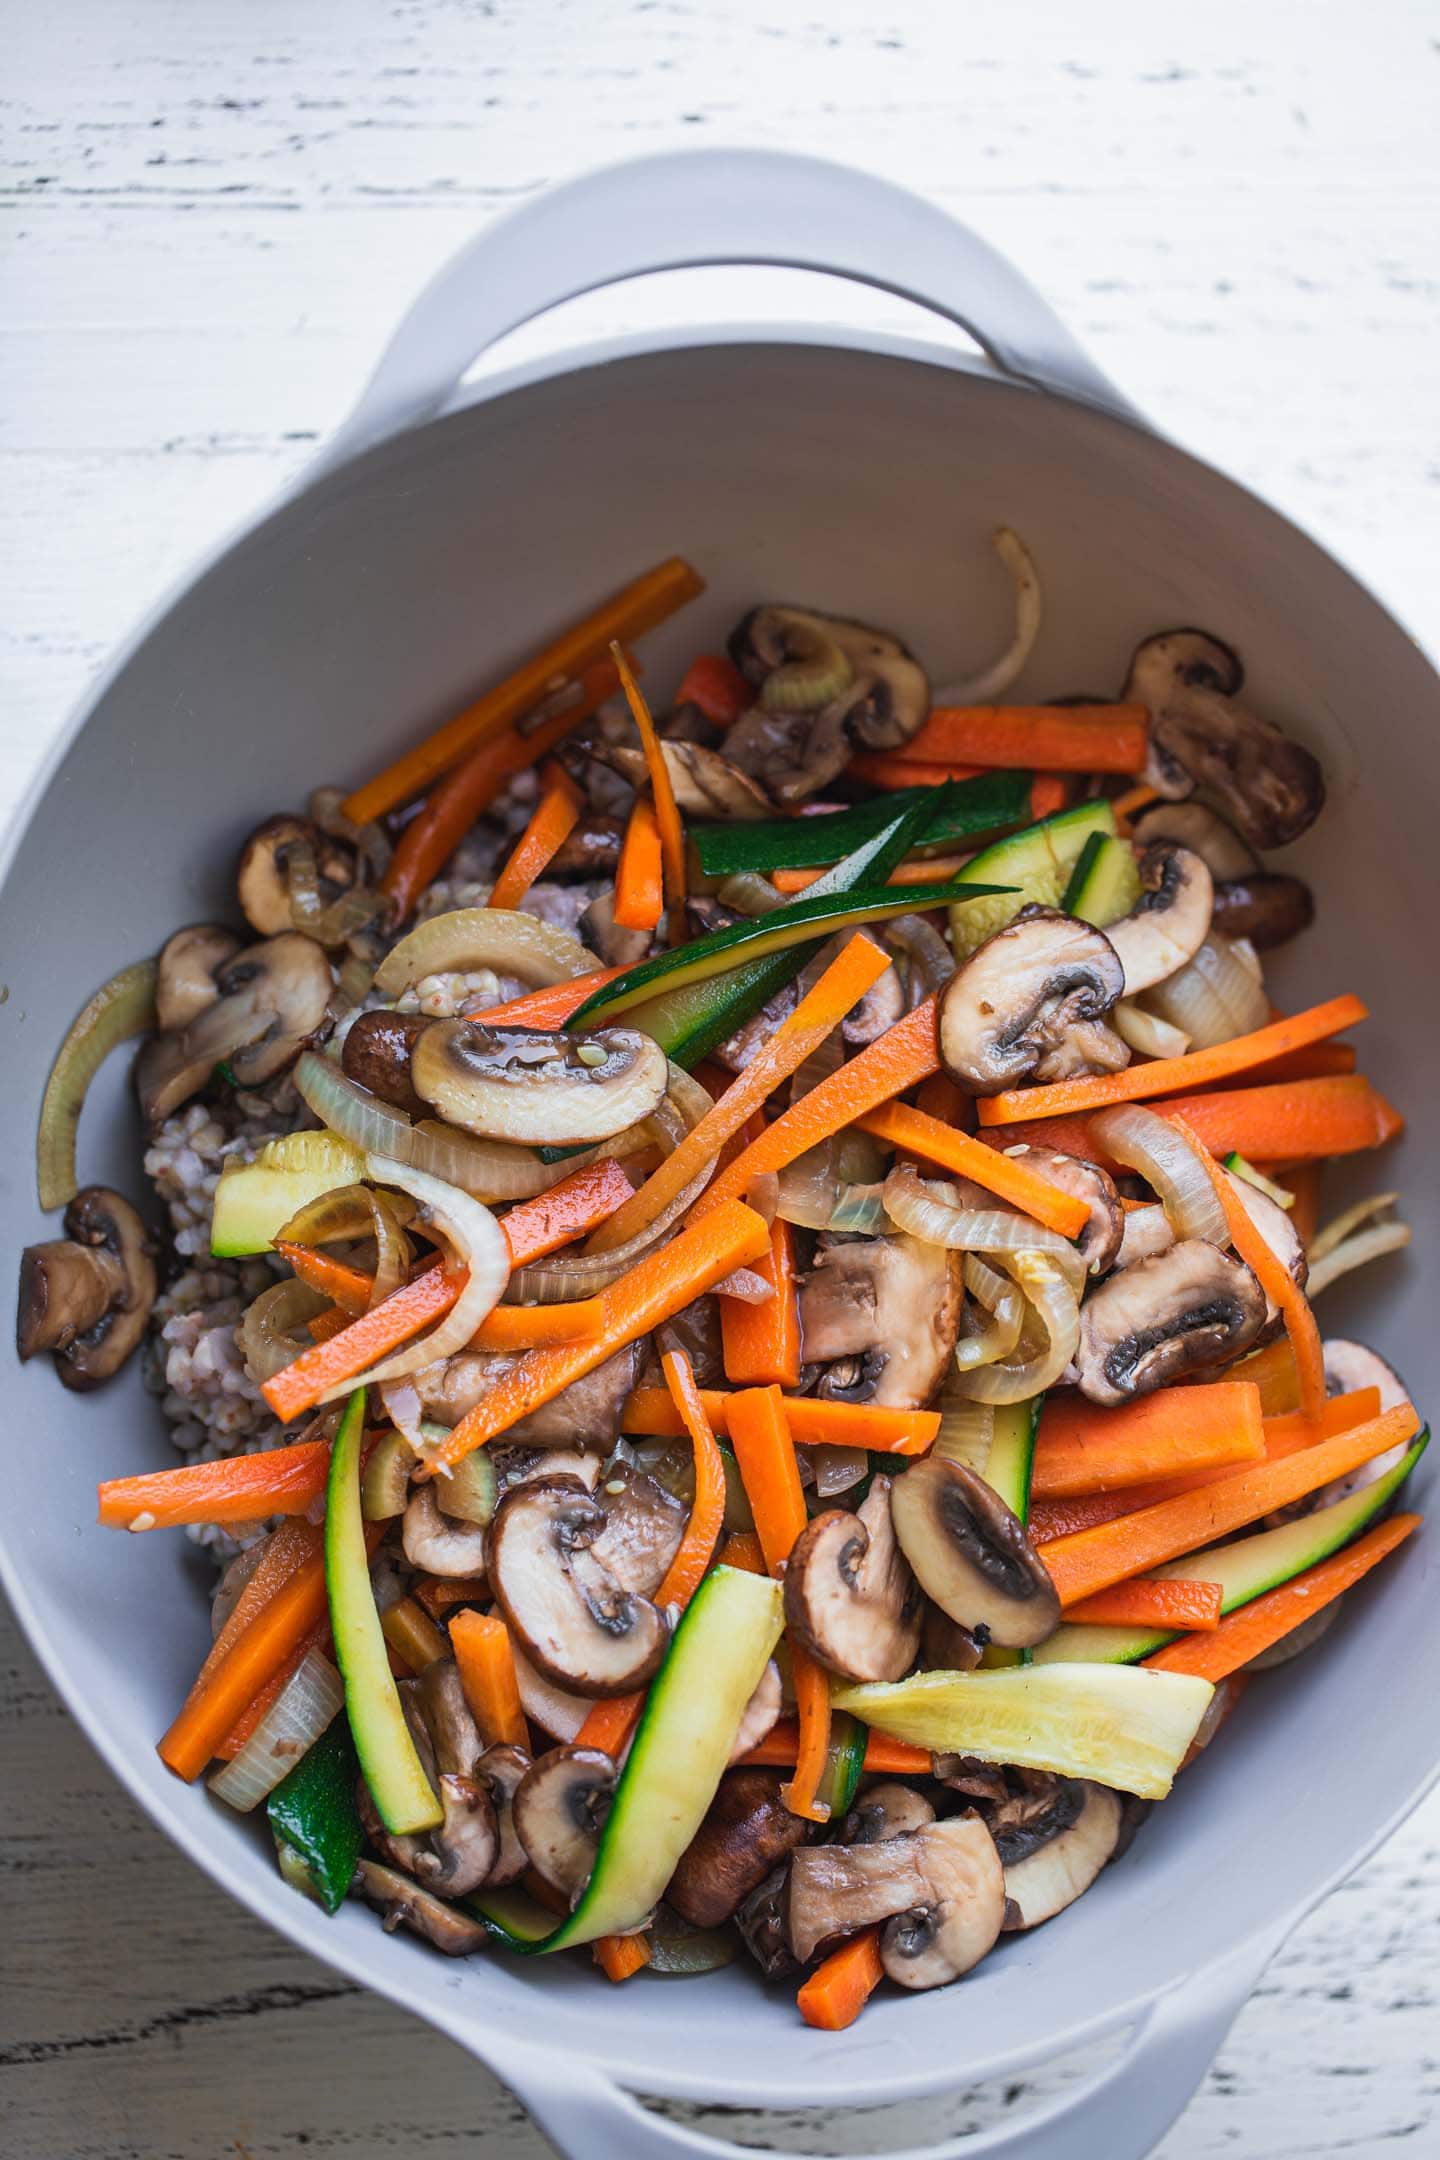 Vegetables and buckwheat in a mixing bowl